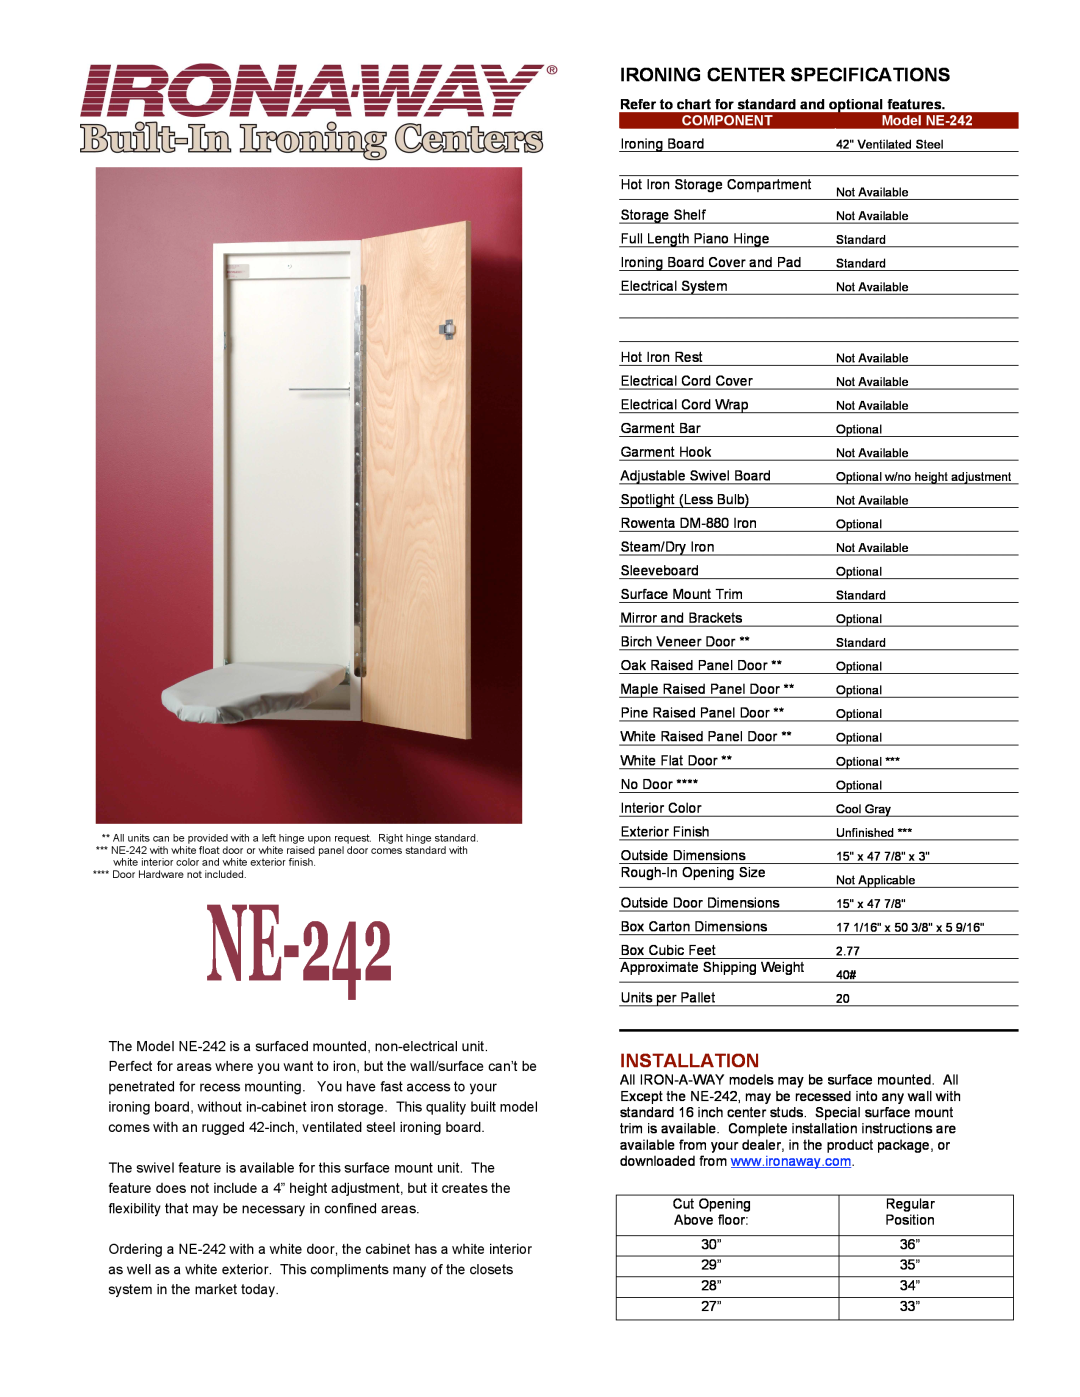 Iron-A-Way NE-242 manual Ironing Center Specifications, Installation, Refer to chart for standard and optional features 